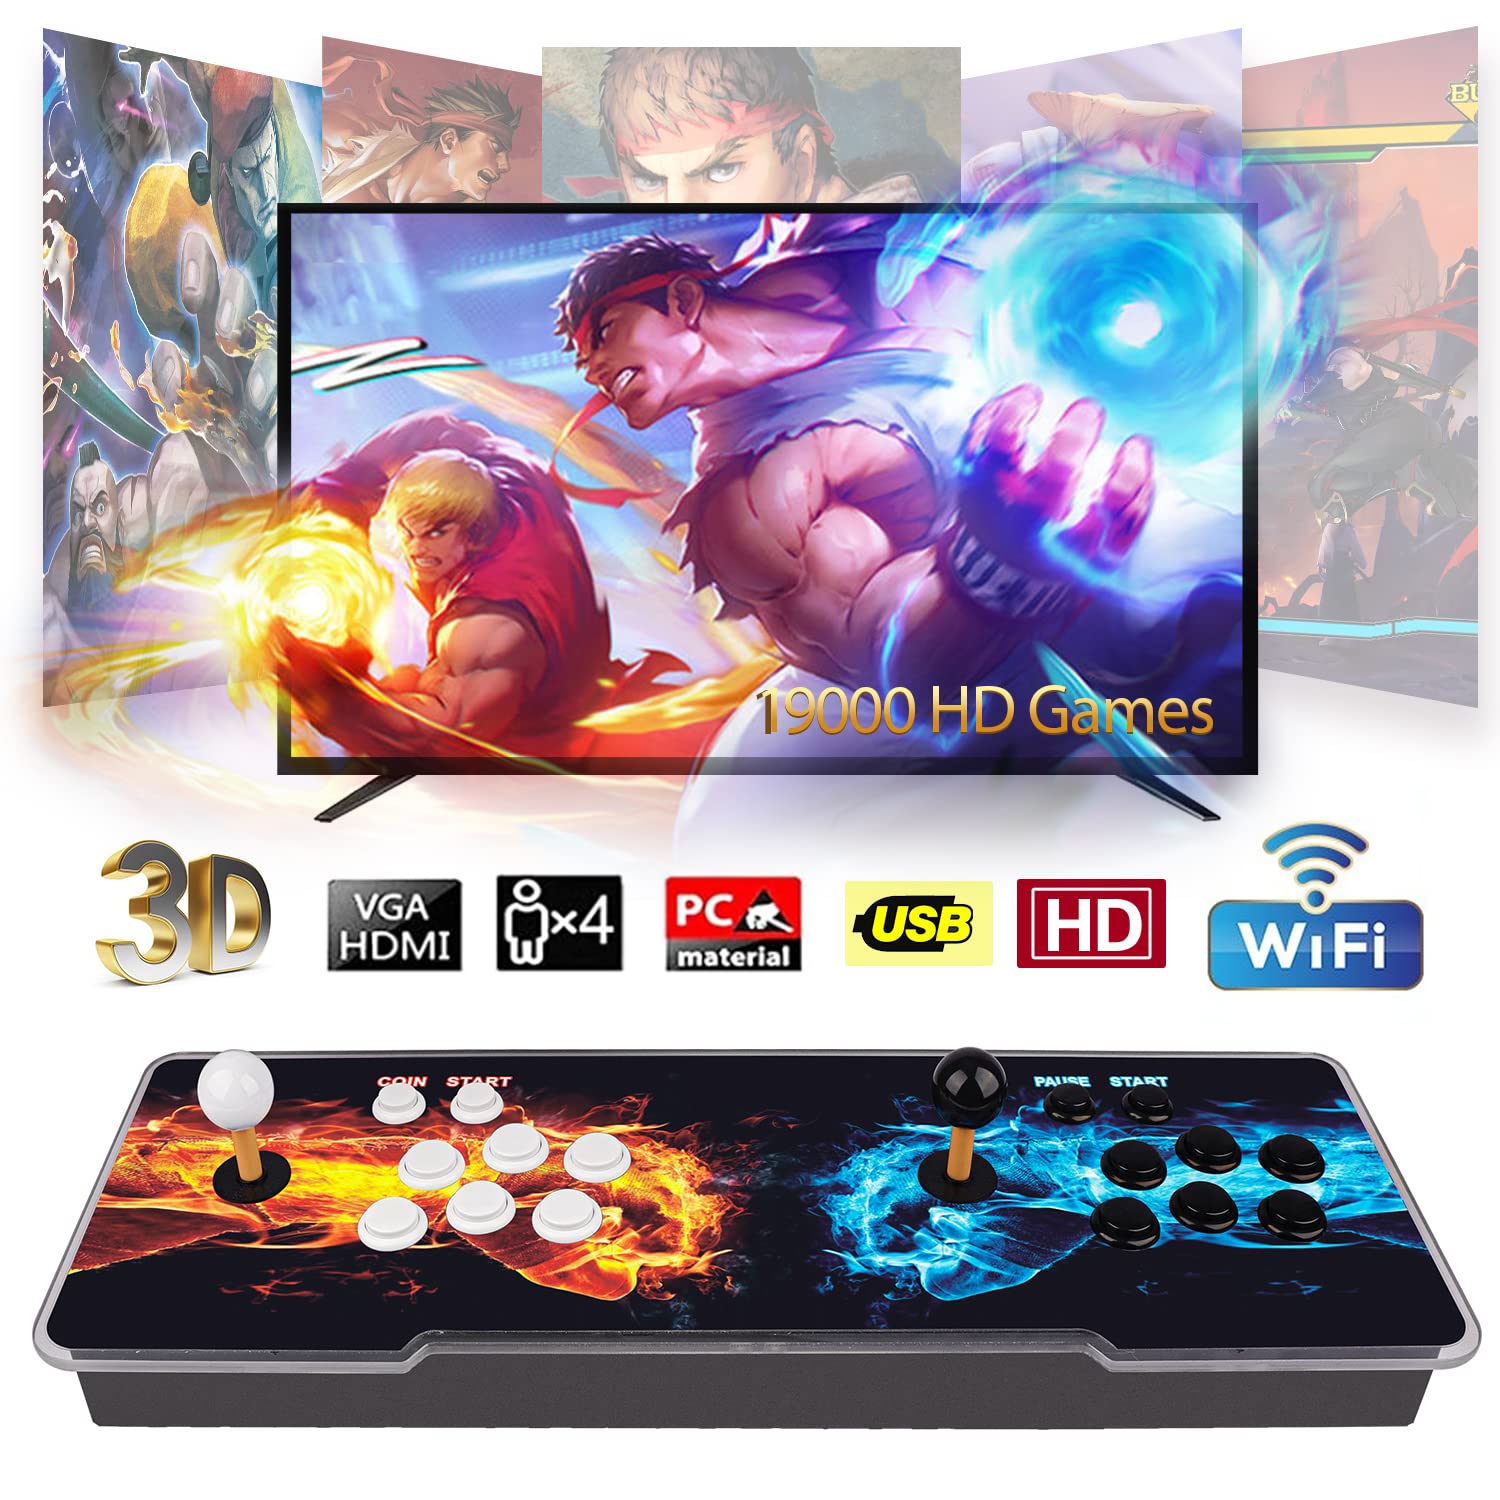 【19000 Games in 1】 3D+ Games- Support 3D Games,  1280x720,Search/Save/Hide/Pause Games, Favorite List, 4 Players Online Game